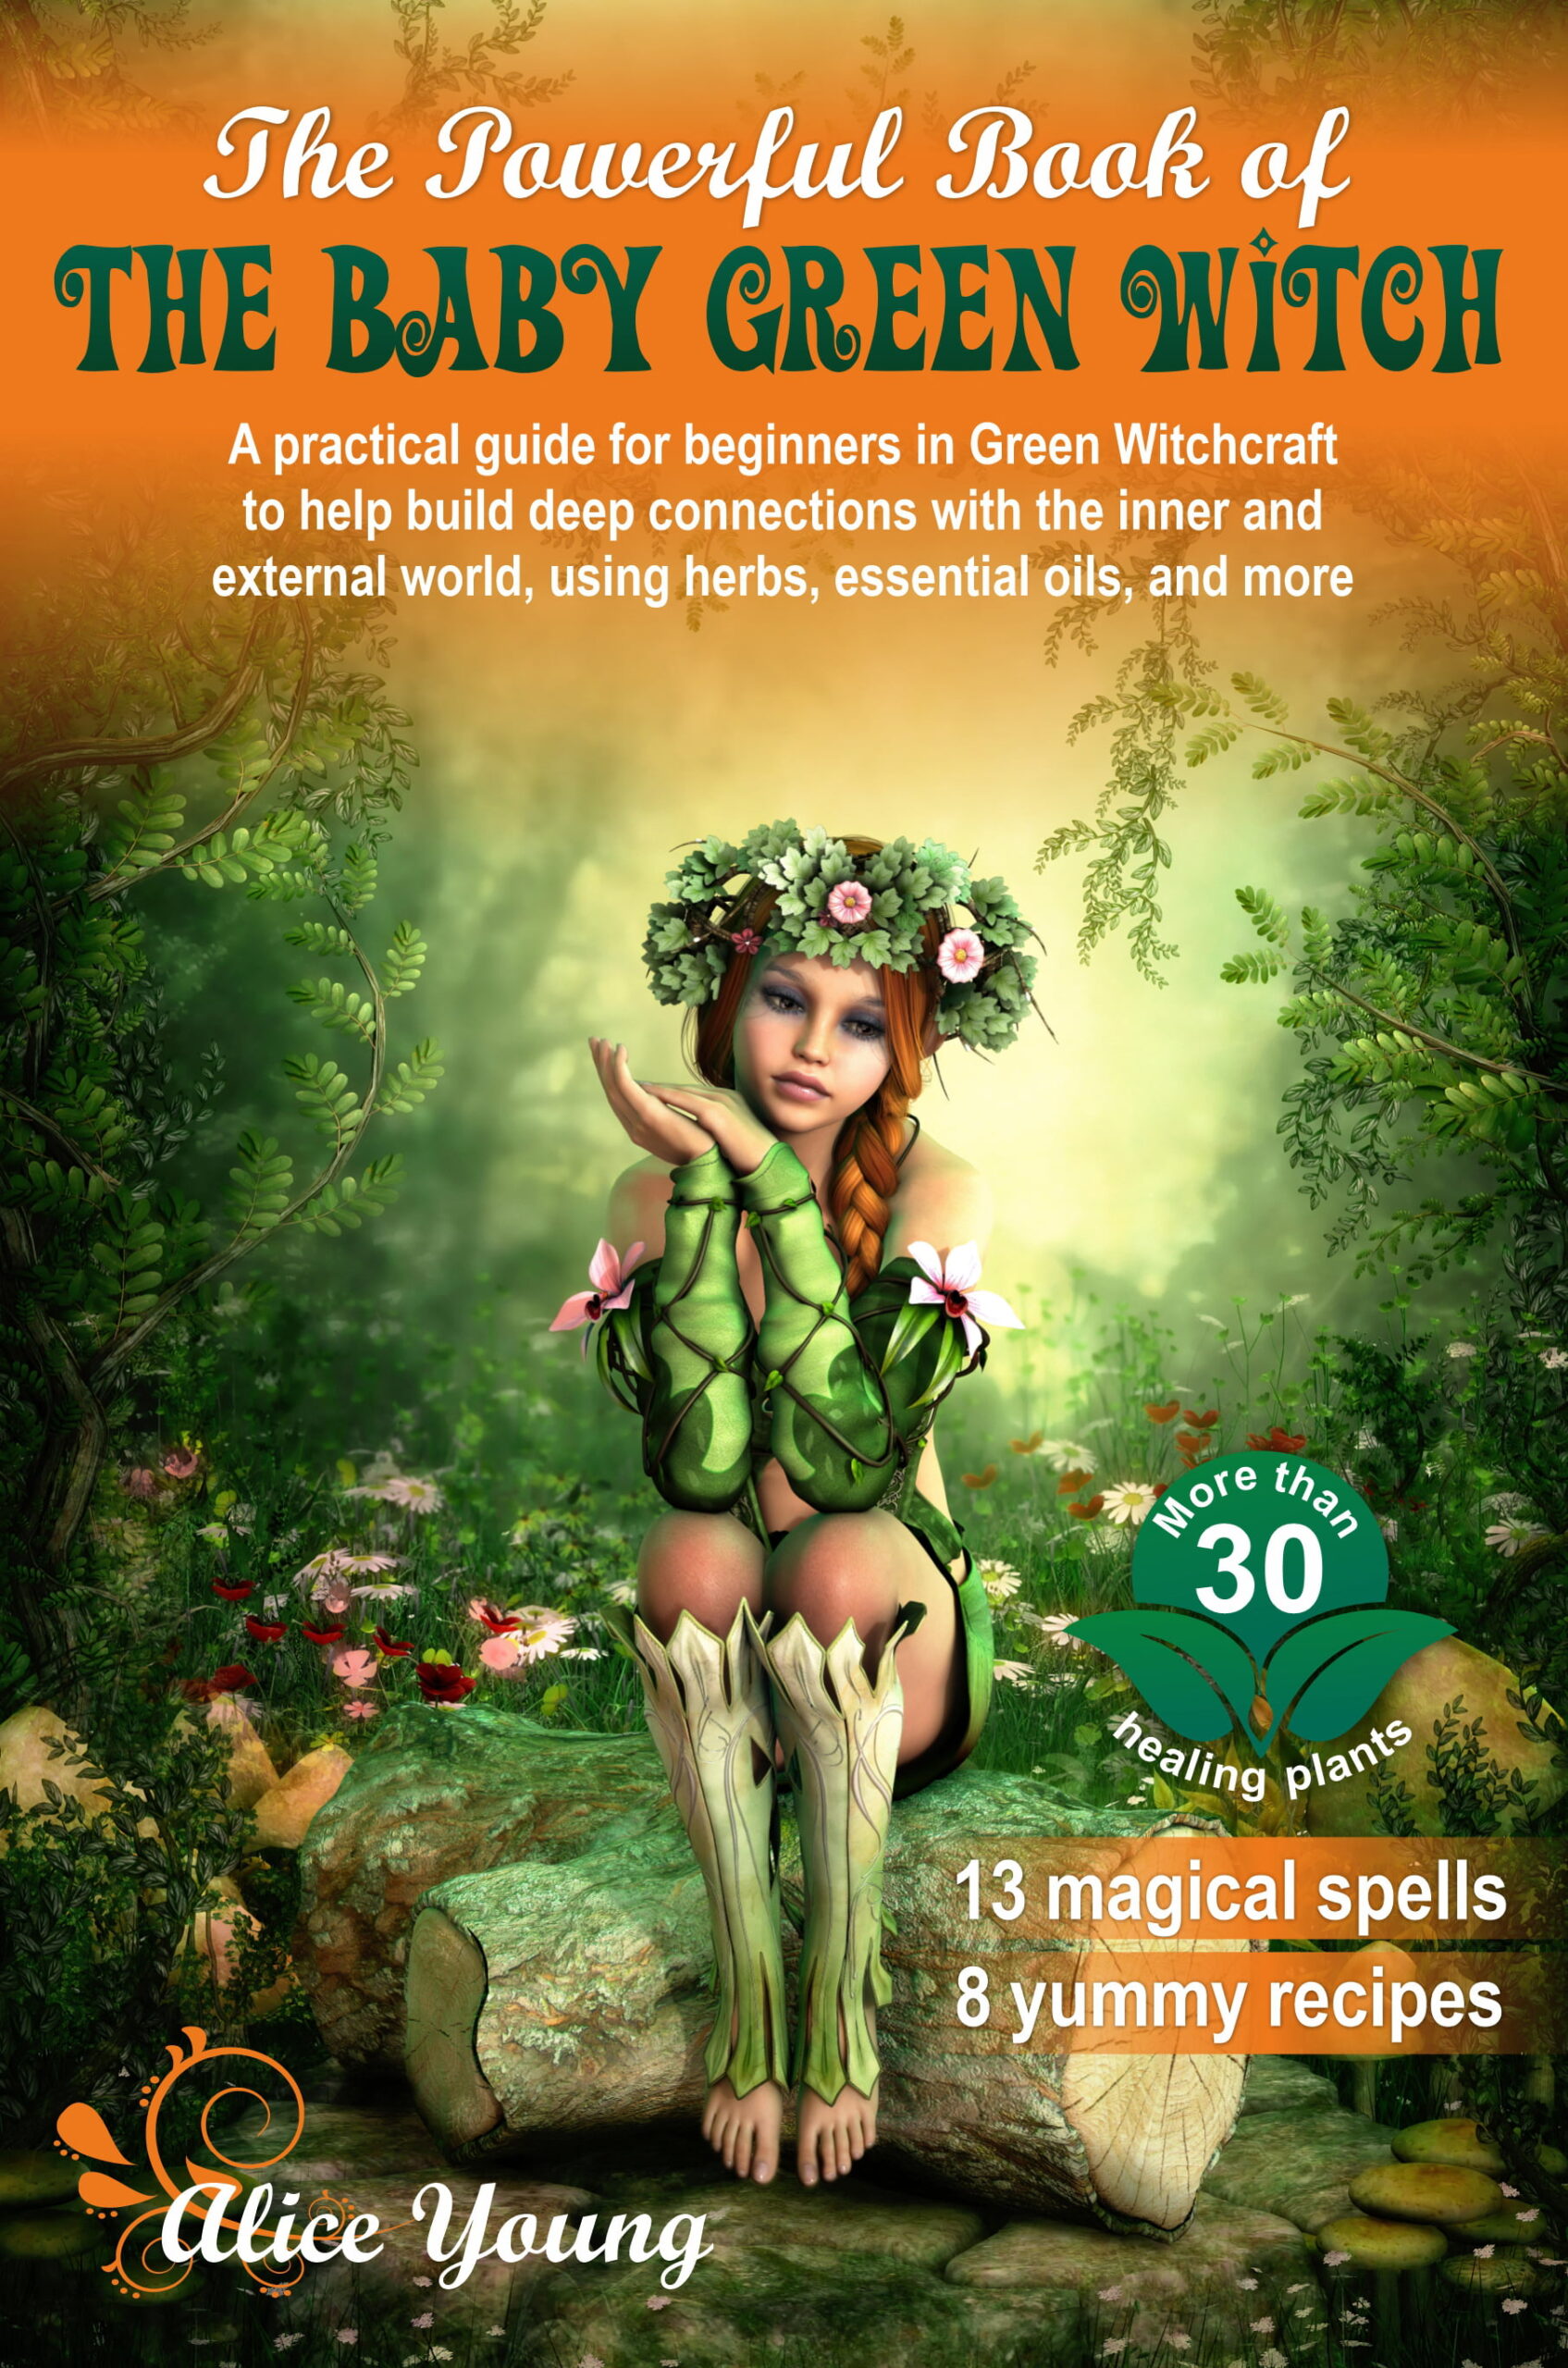 FREE: The Powerful Book Of The Baby Green Witch by alice young